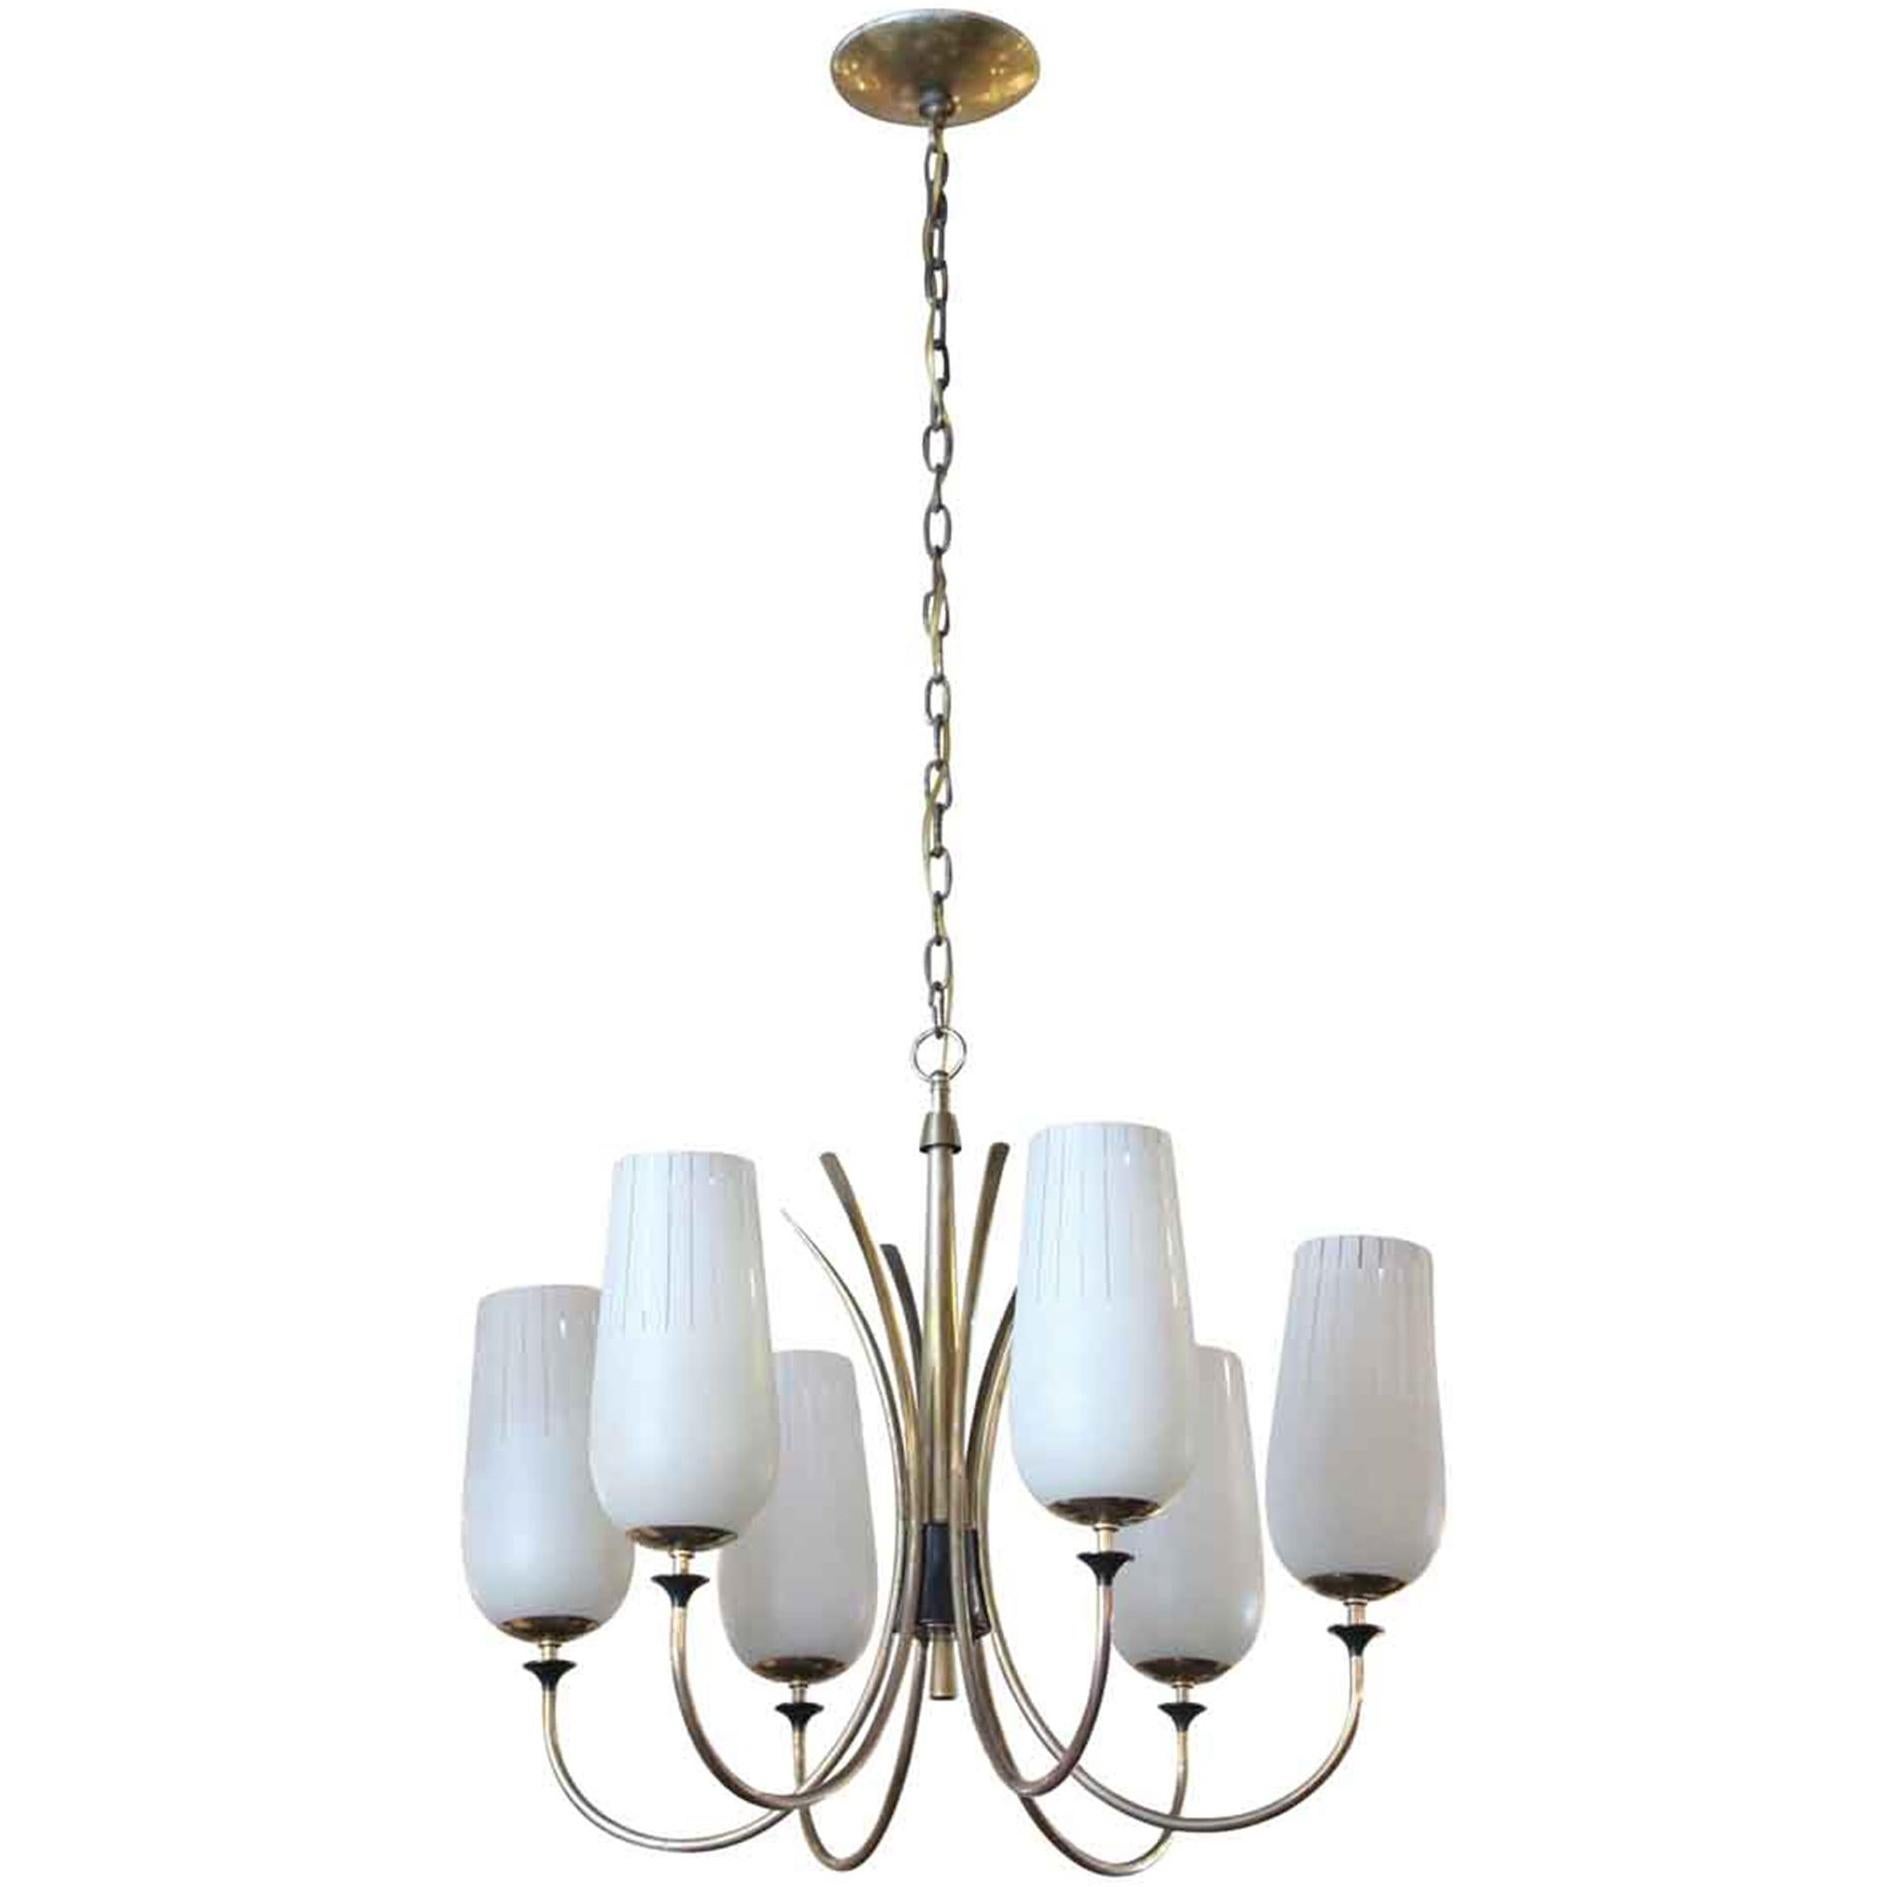 1960s Mid-Century Modern Chandelier with Six Arms in a Polished Brass Finish